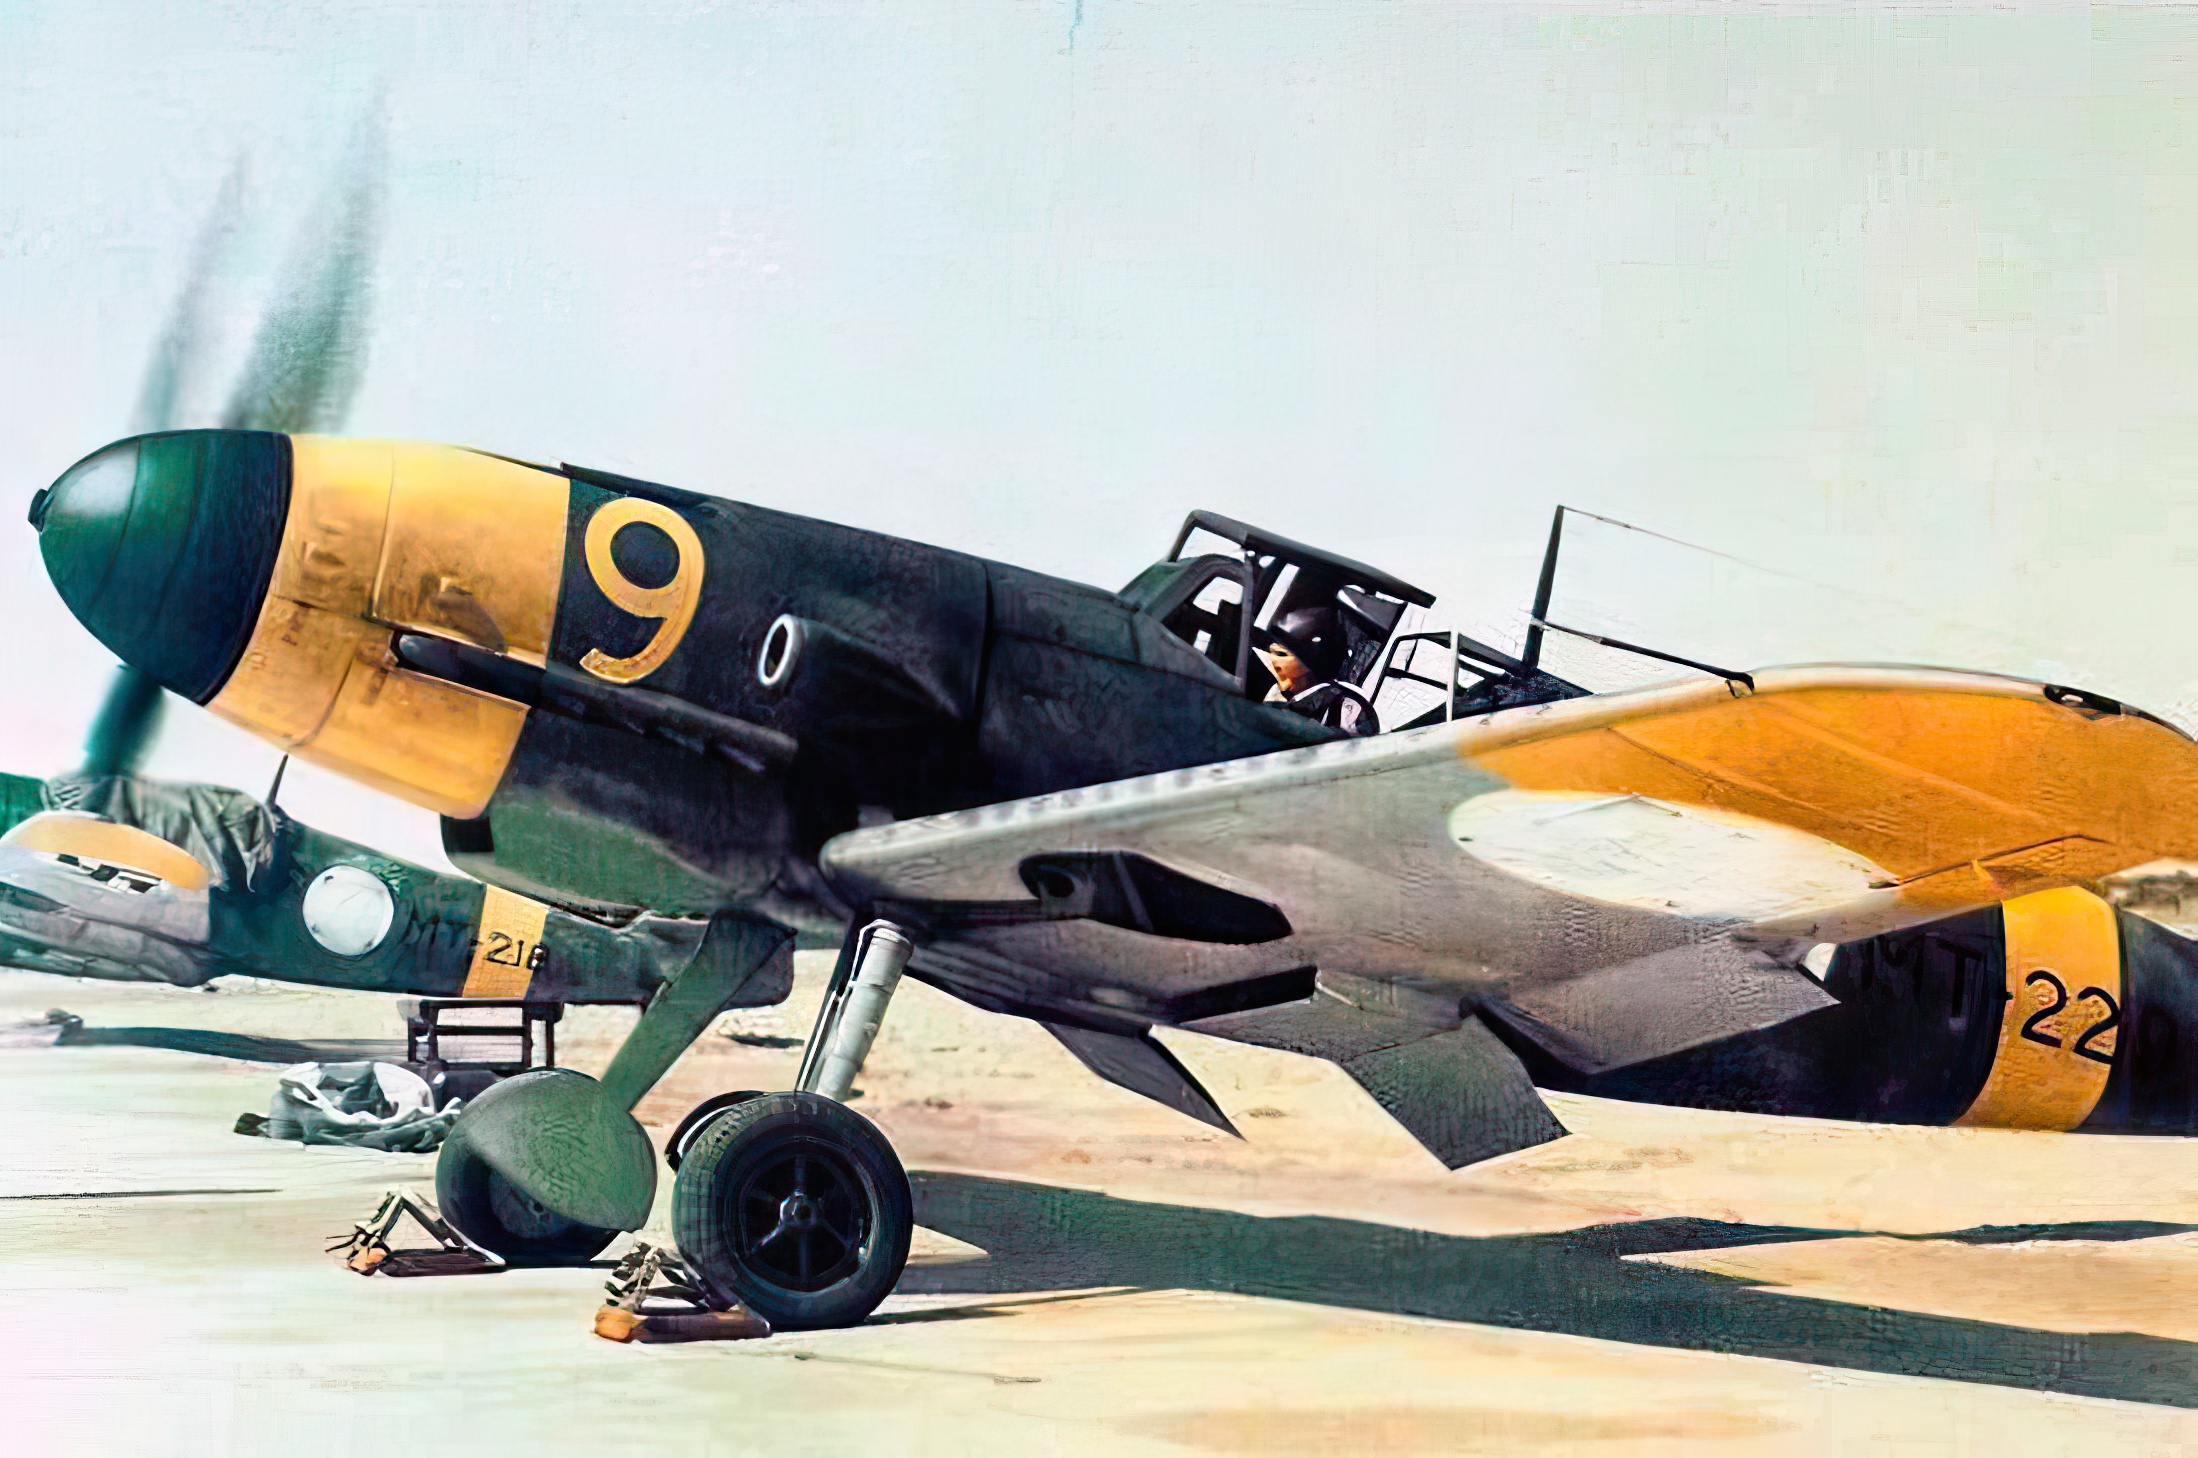 Messerschmitt Bf 109G-2 of the Finnish Airforce. Flying this type of plane, Juutilainen scored 58 air victories